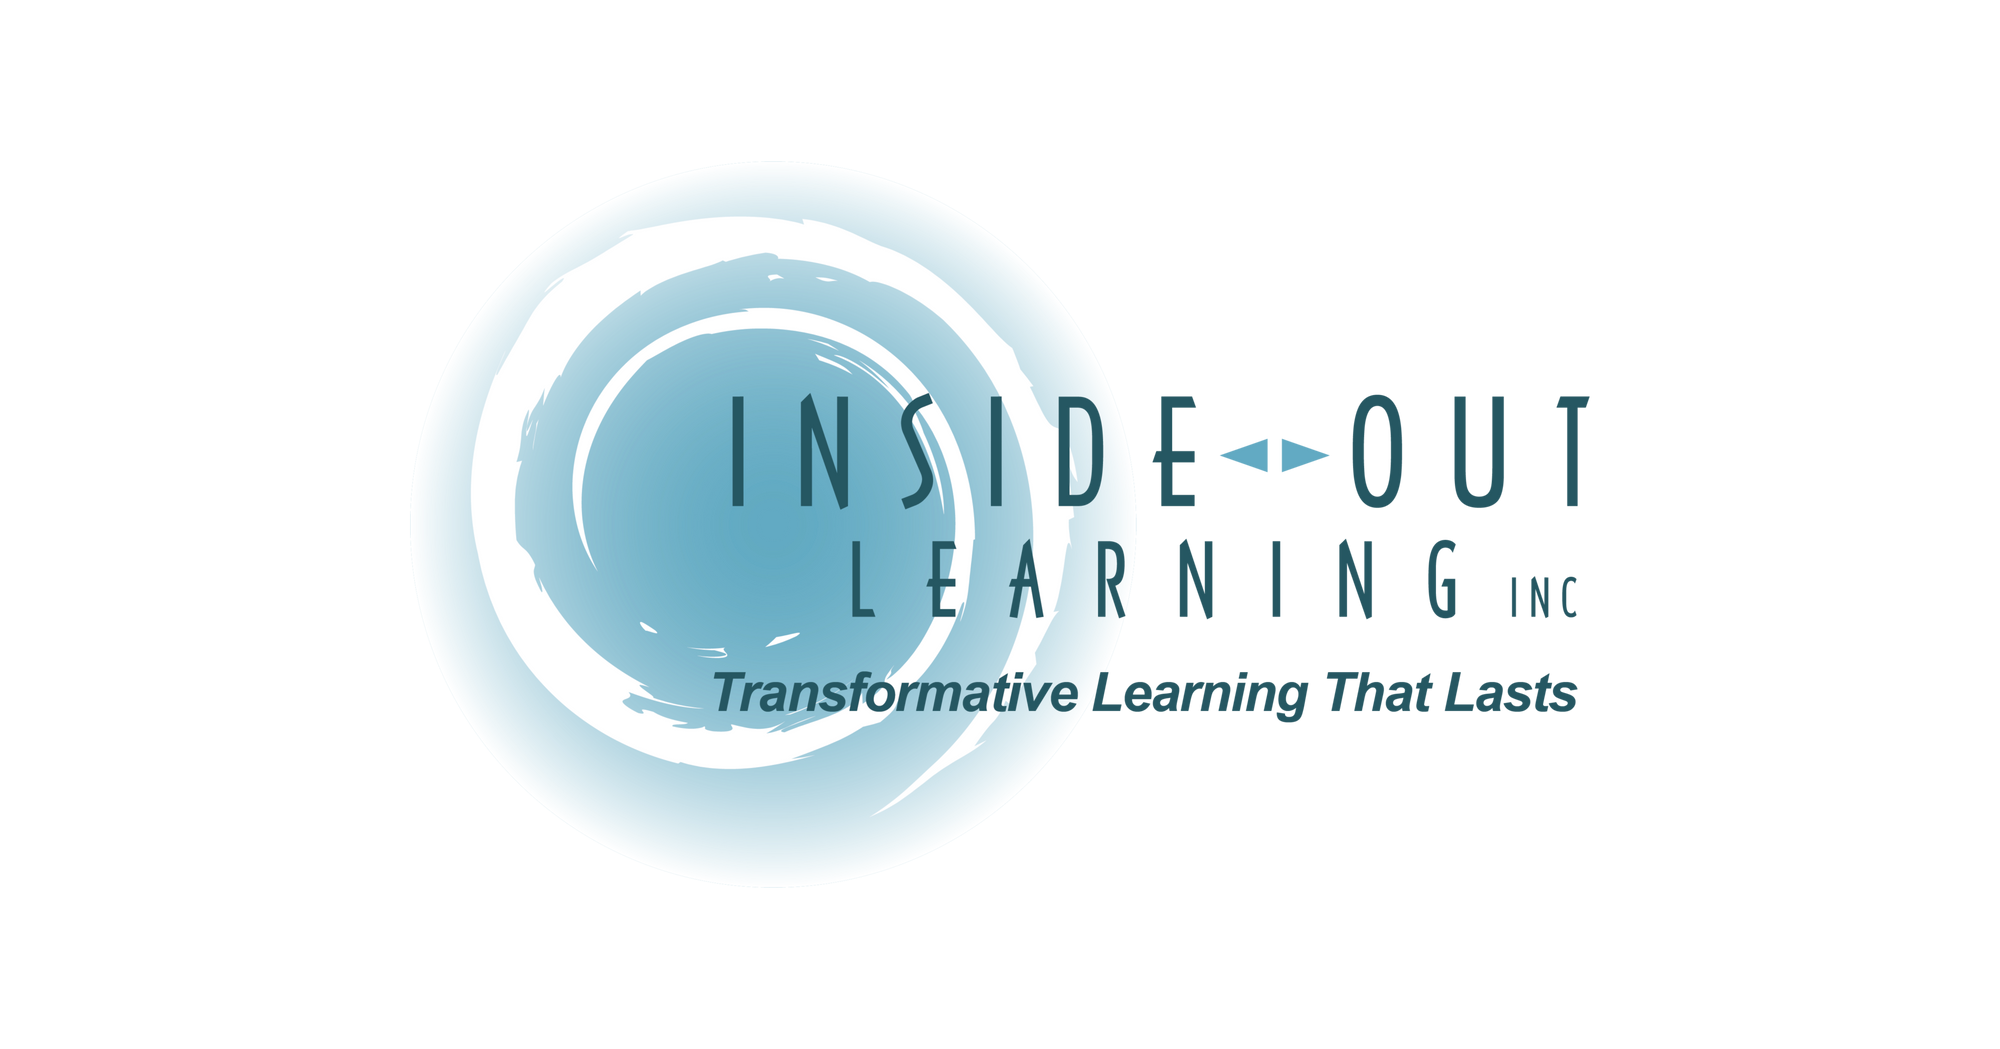 Achieve Exceptional Results - Inside-Out Learning